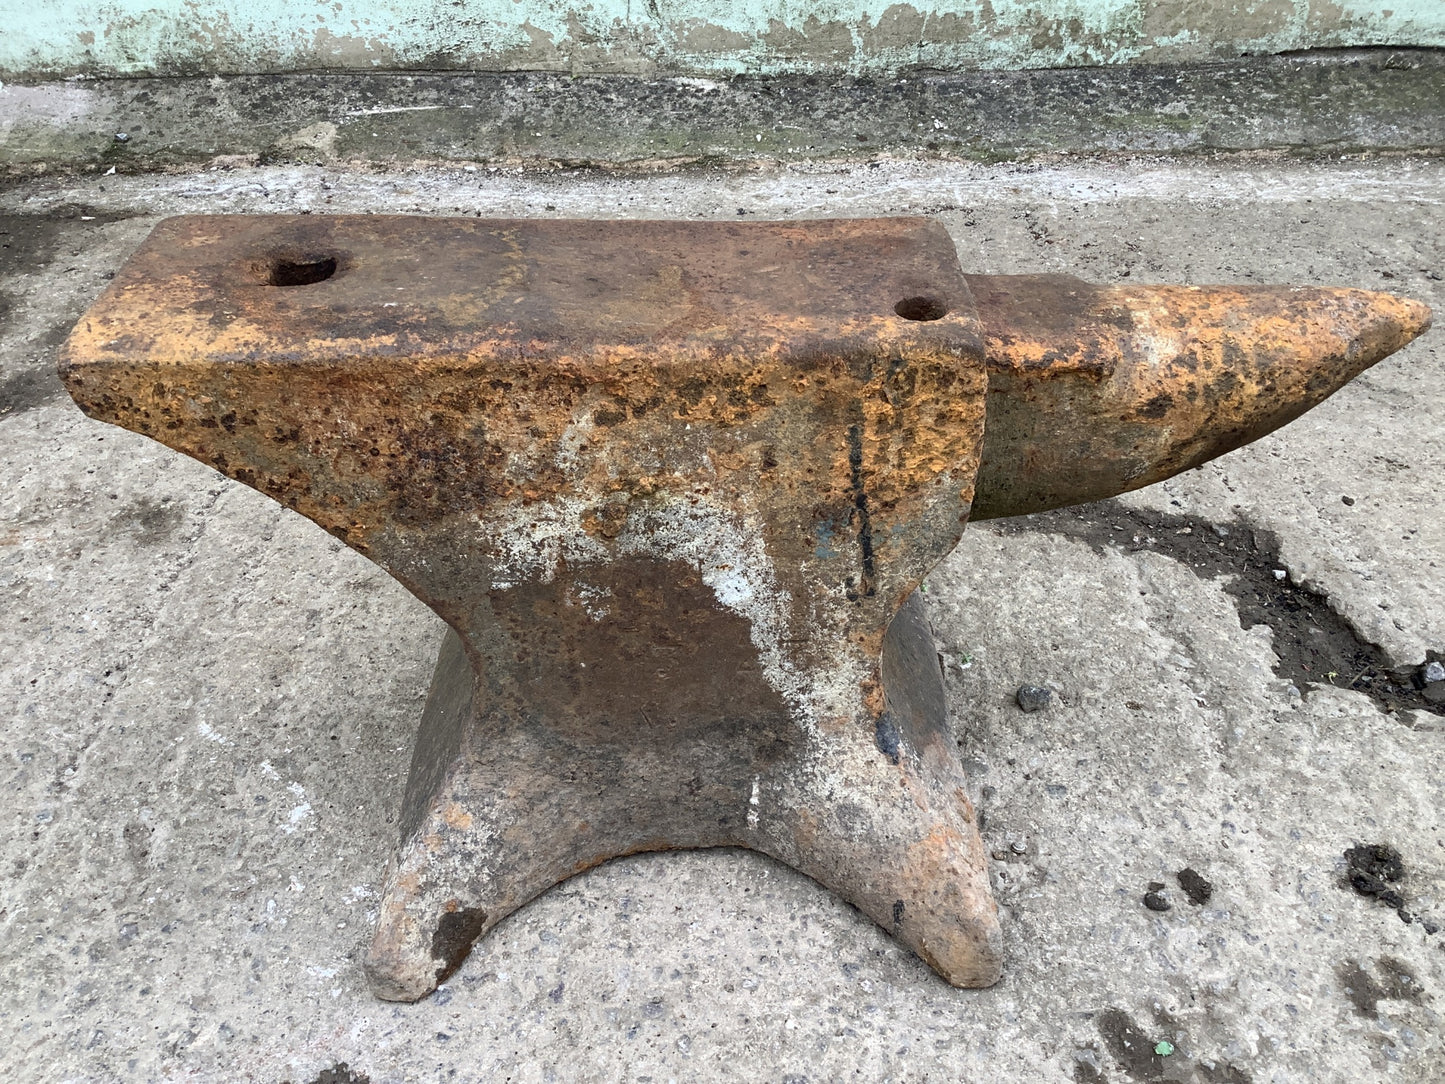 Reclaimed Heavy Old Cast Iron Blacksmiths Metal Working Anvil Single Beck